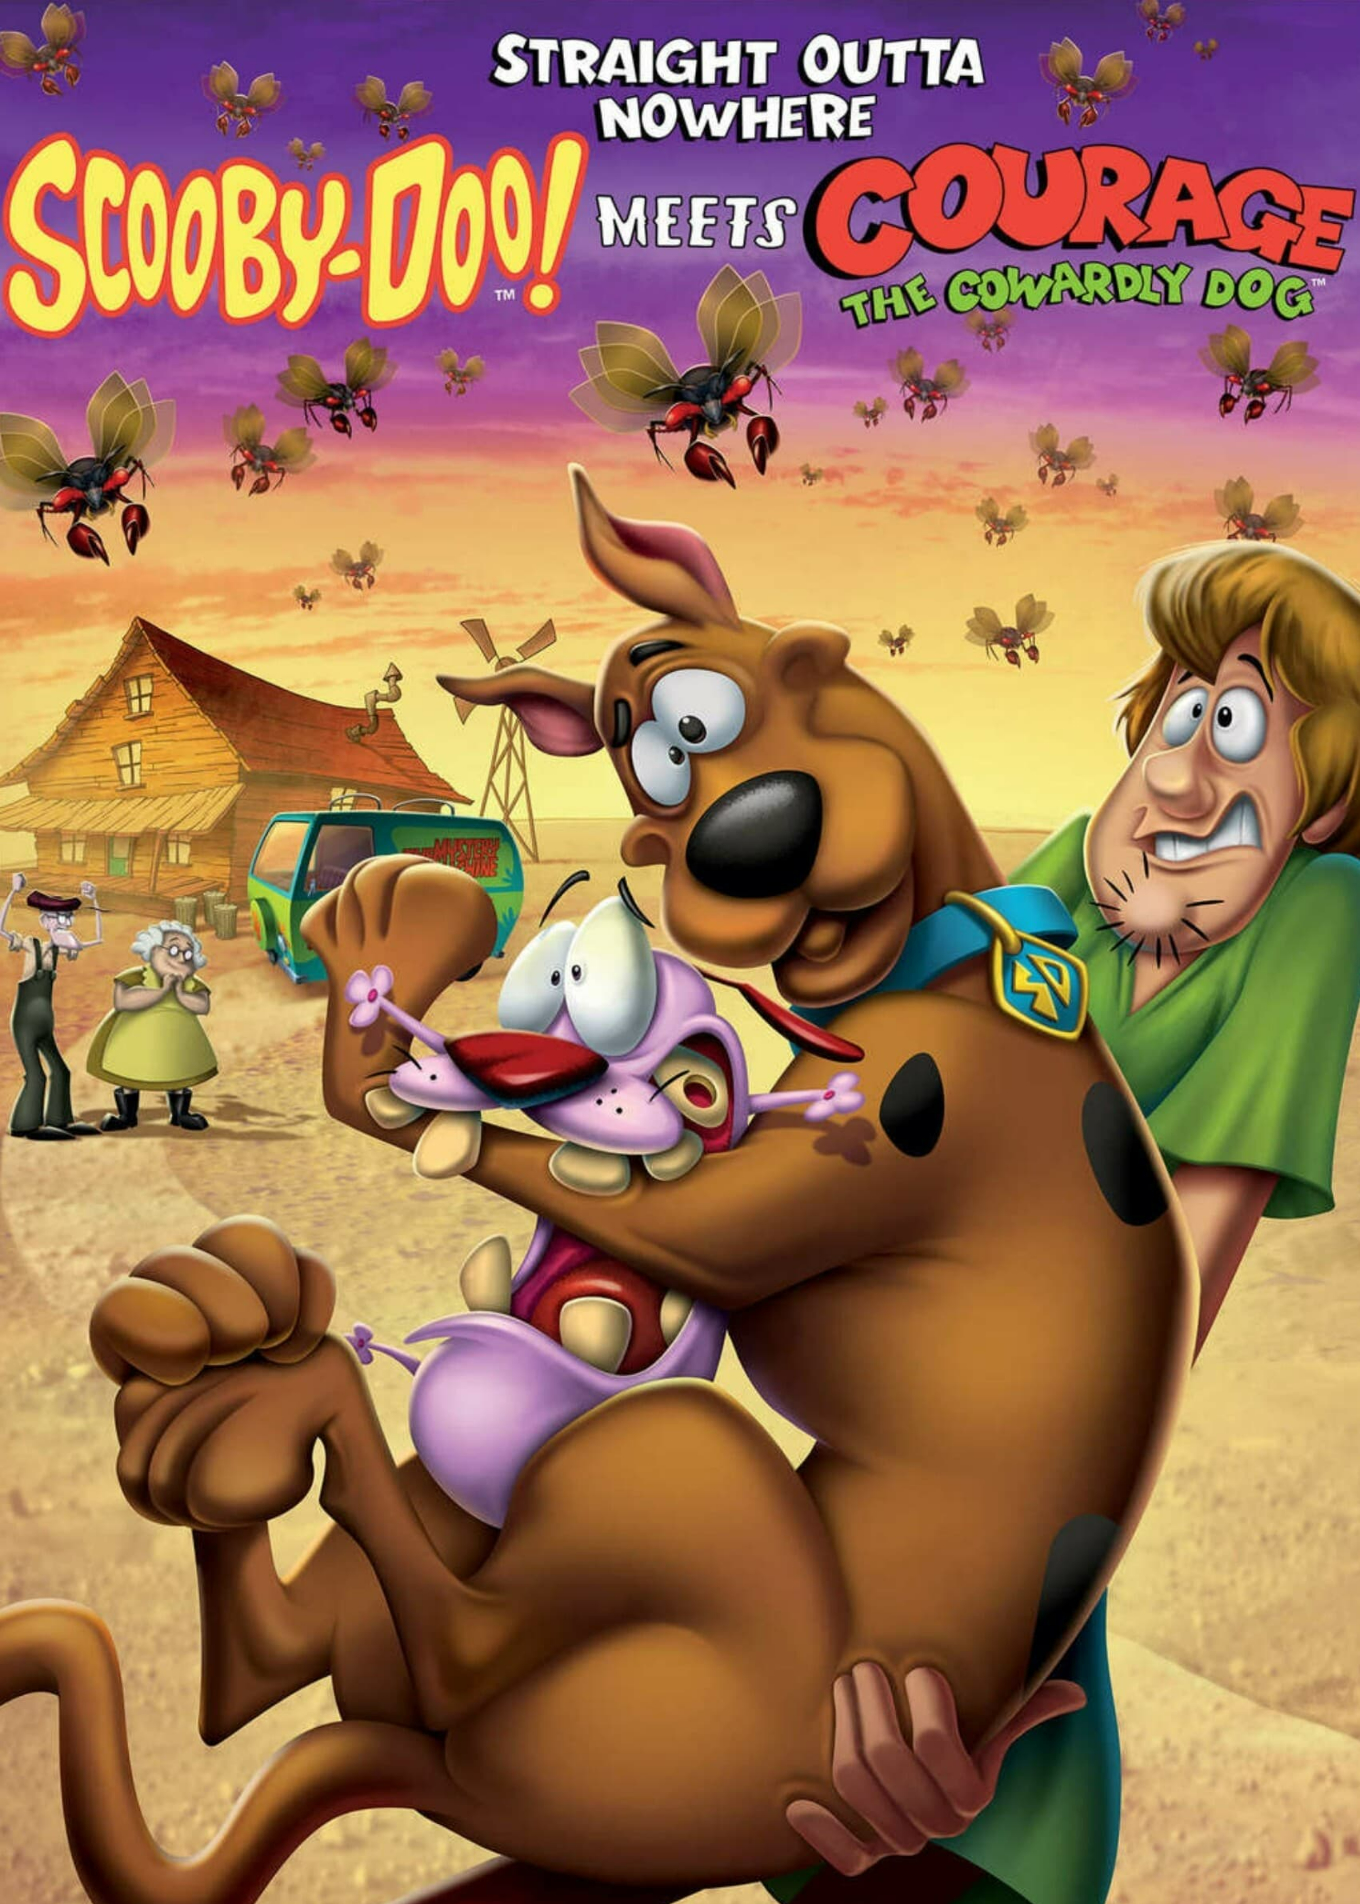 Xem Phim Straight Outta Nowhere: Scooby-Doo! Meets Courage the Cowardly Dog (Straight Outta Nowhere: Scooby-Doo! Meets Courage the Cowardly Dog)